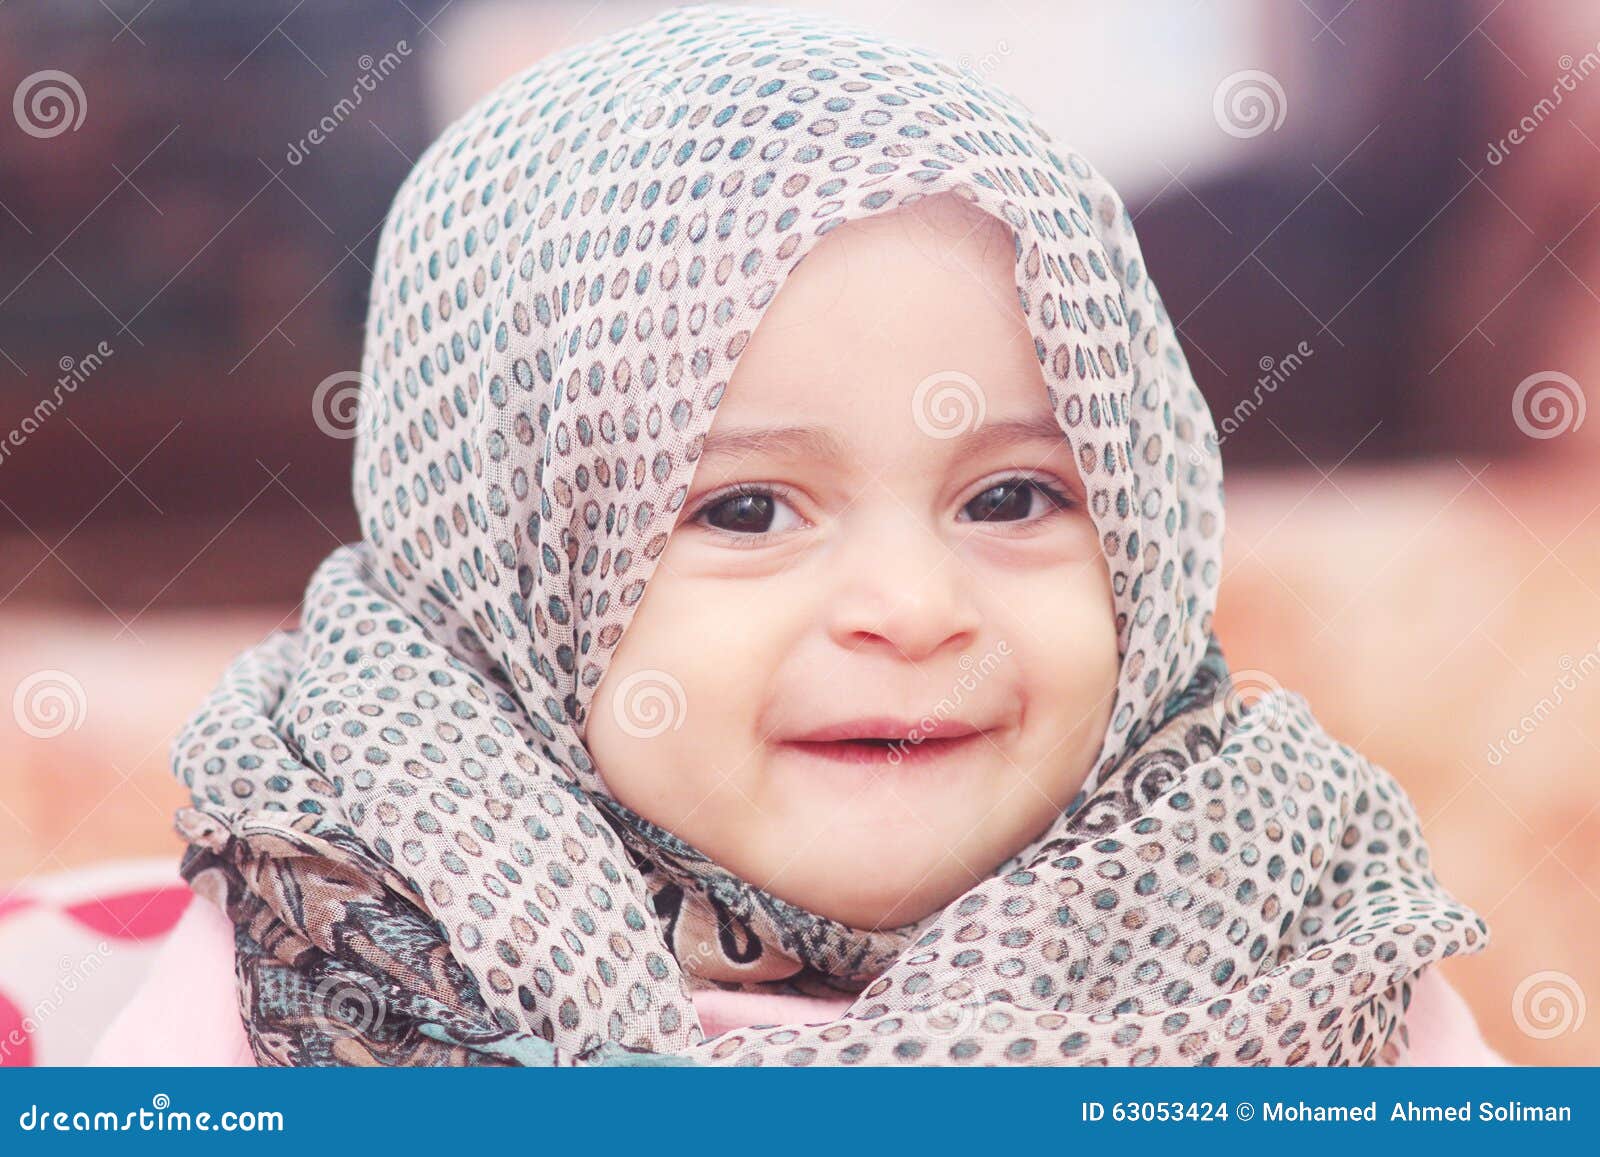 Muslim baby girl stock photo. Image of cute, people, clothes - 63053424